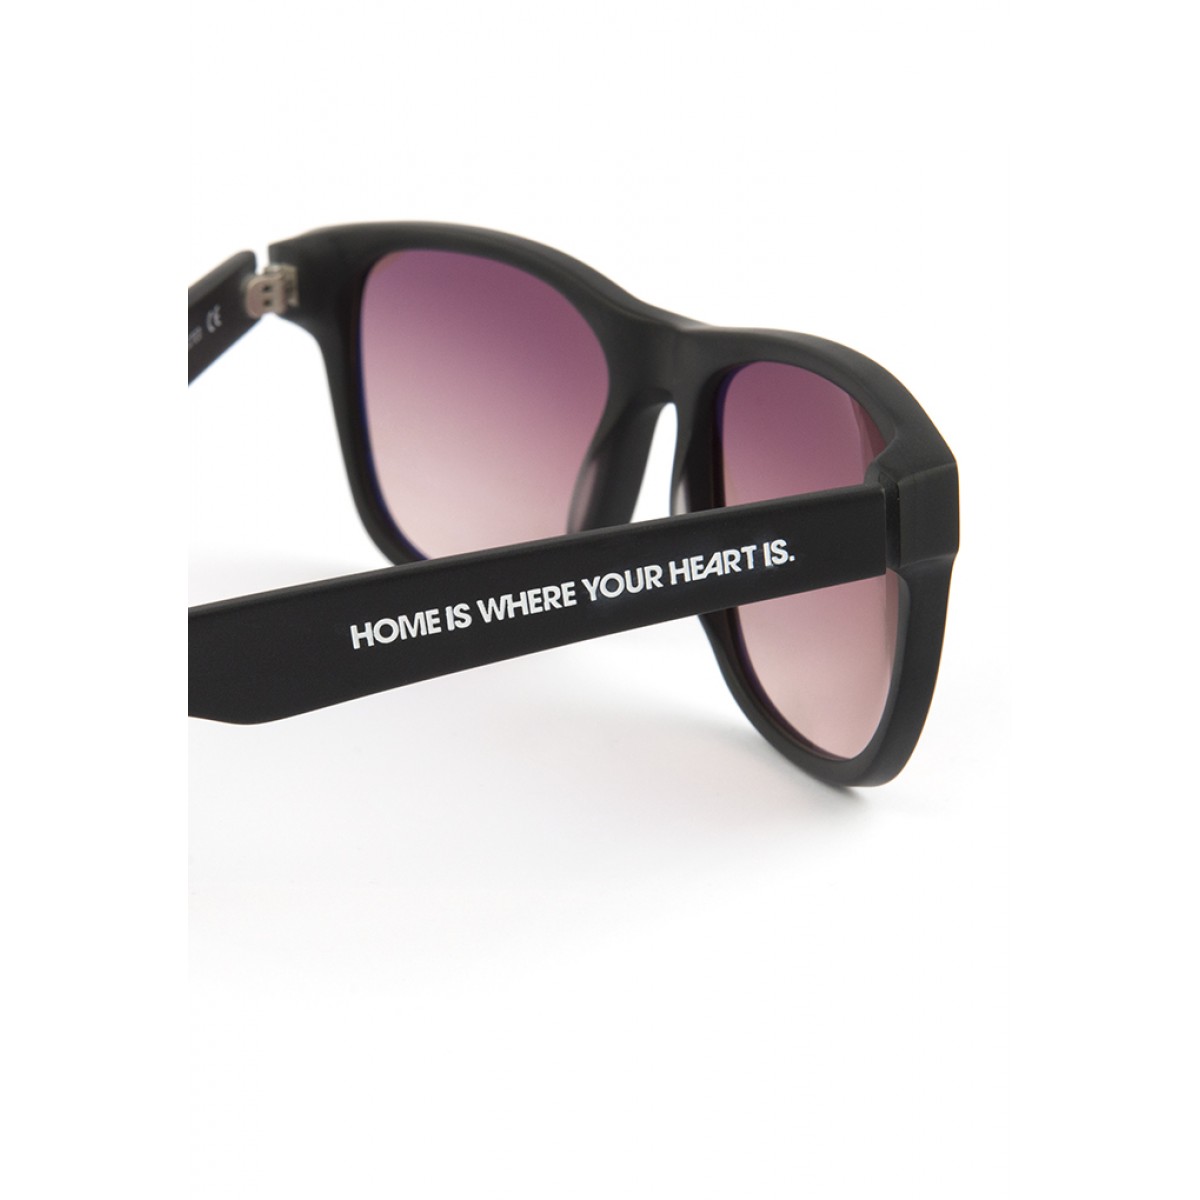 HOME IS WHERE YOUR HEART IS. – Acetat Sonnenbrille "BLACK BEAUTY II"